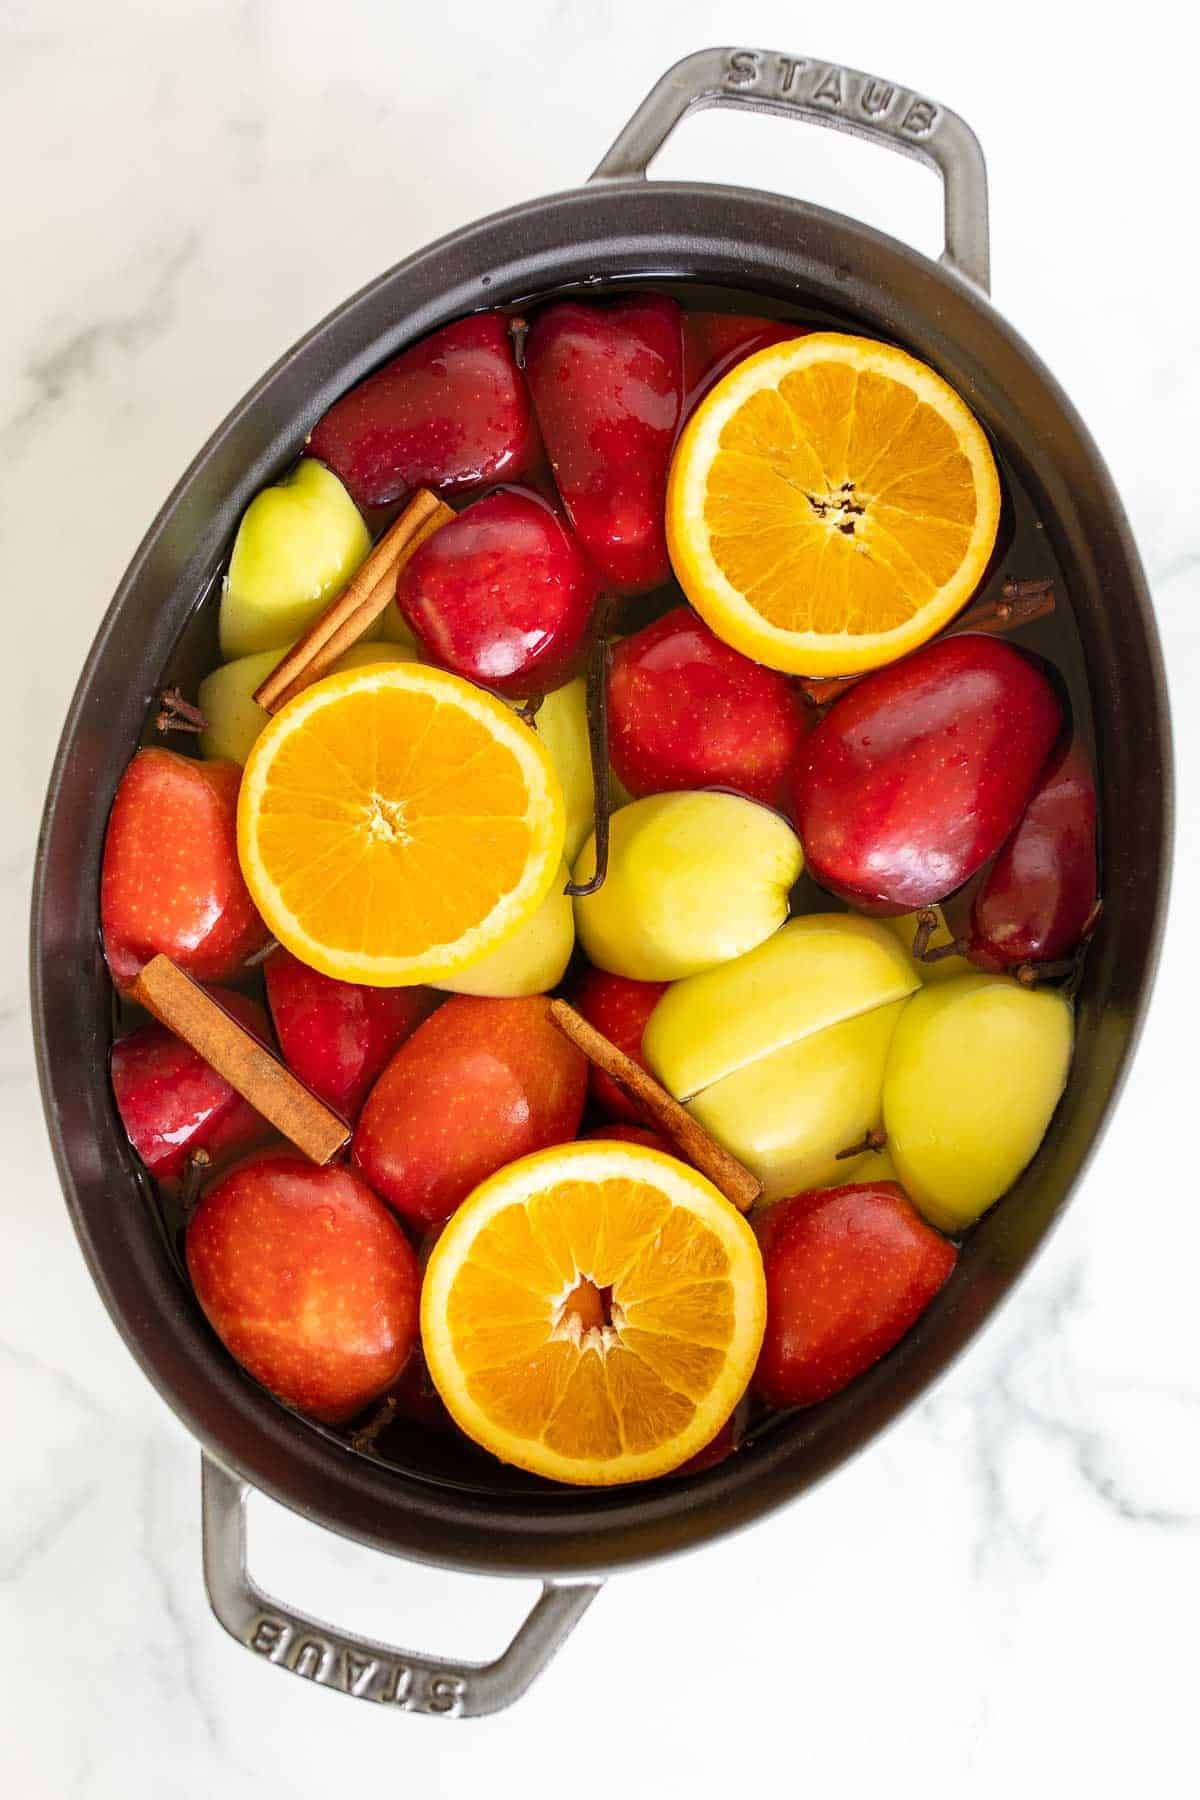 A cast iron pot filled with orange slices , apple slices and more to make a homemade apple cider recipe.